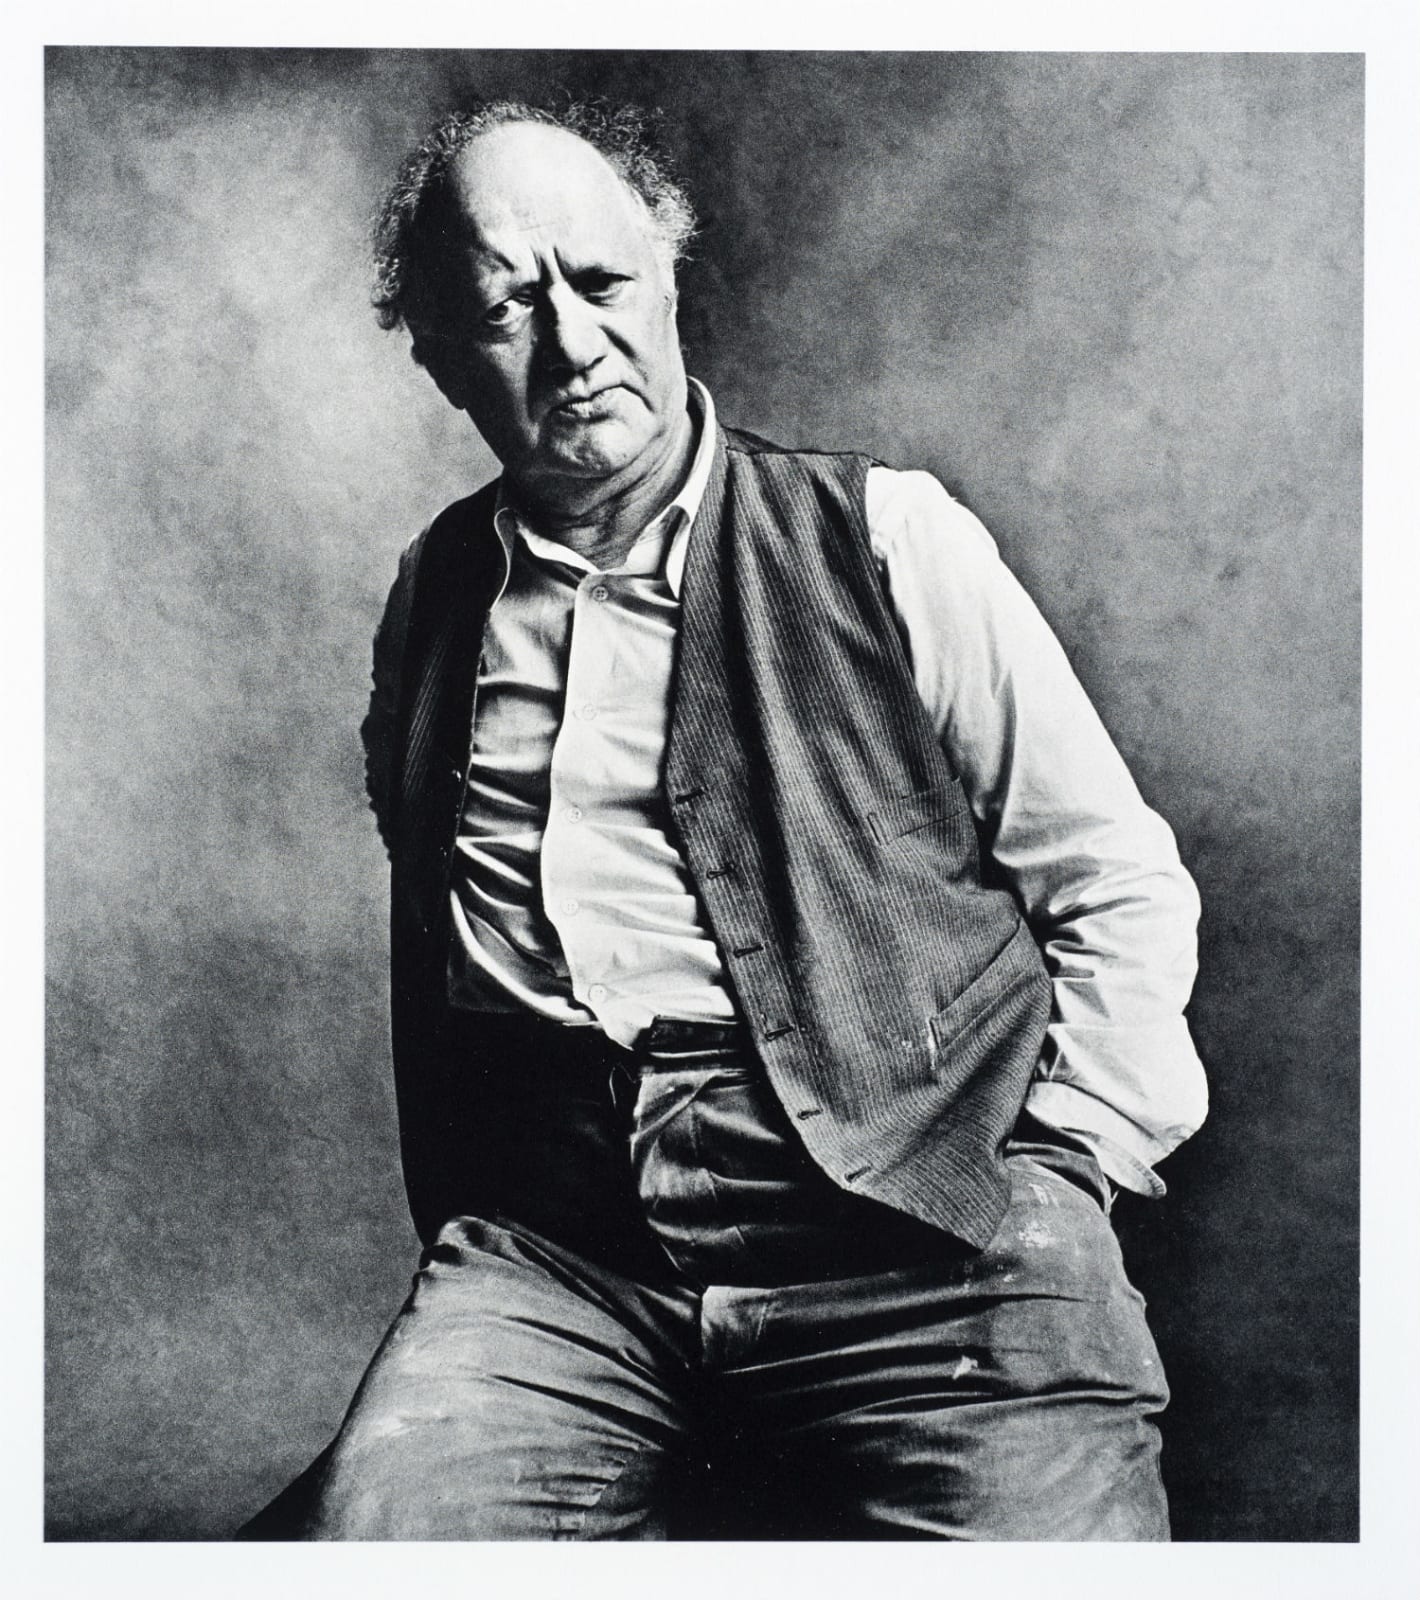 Irving Penn (1917-2009) Sir Jacob Epstein 1950 Gelatin silver print 45.8 x 35.7 (image 23 x 21) cm Ben Uri Collection © Irving Penn Foundation To see and discover more about this artist click here